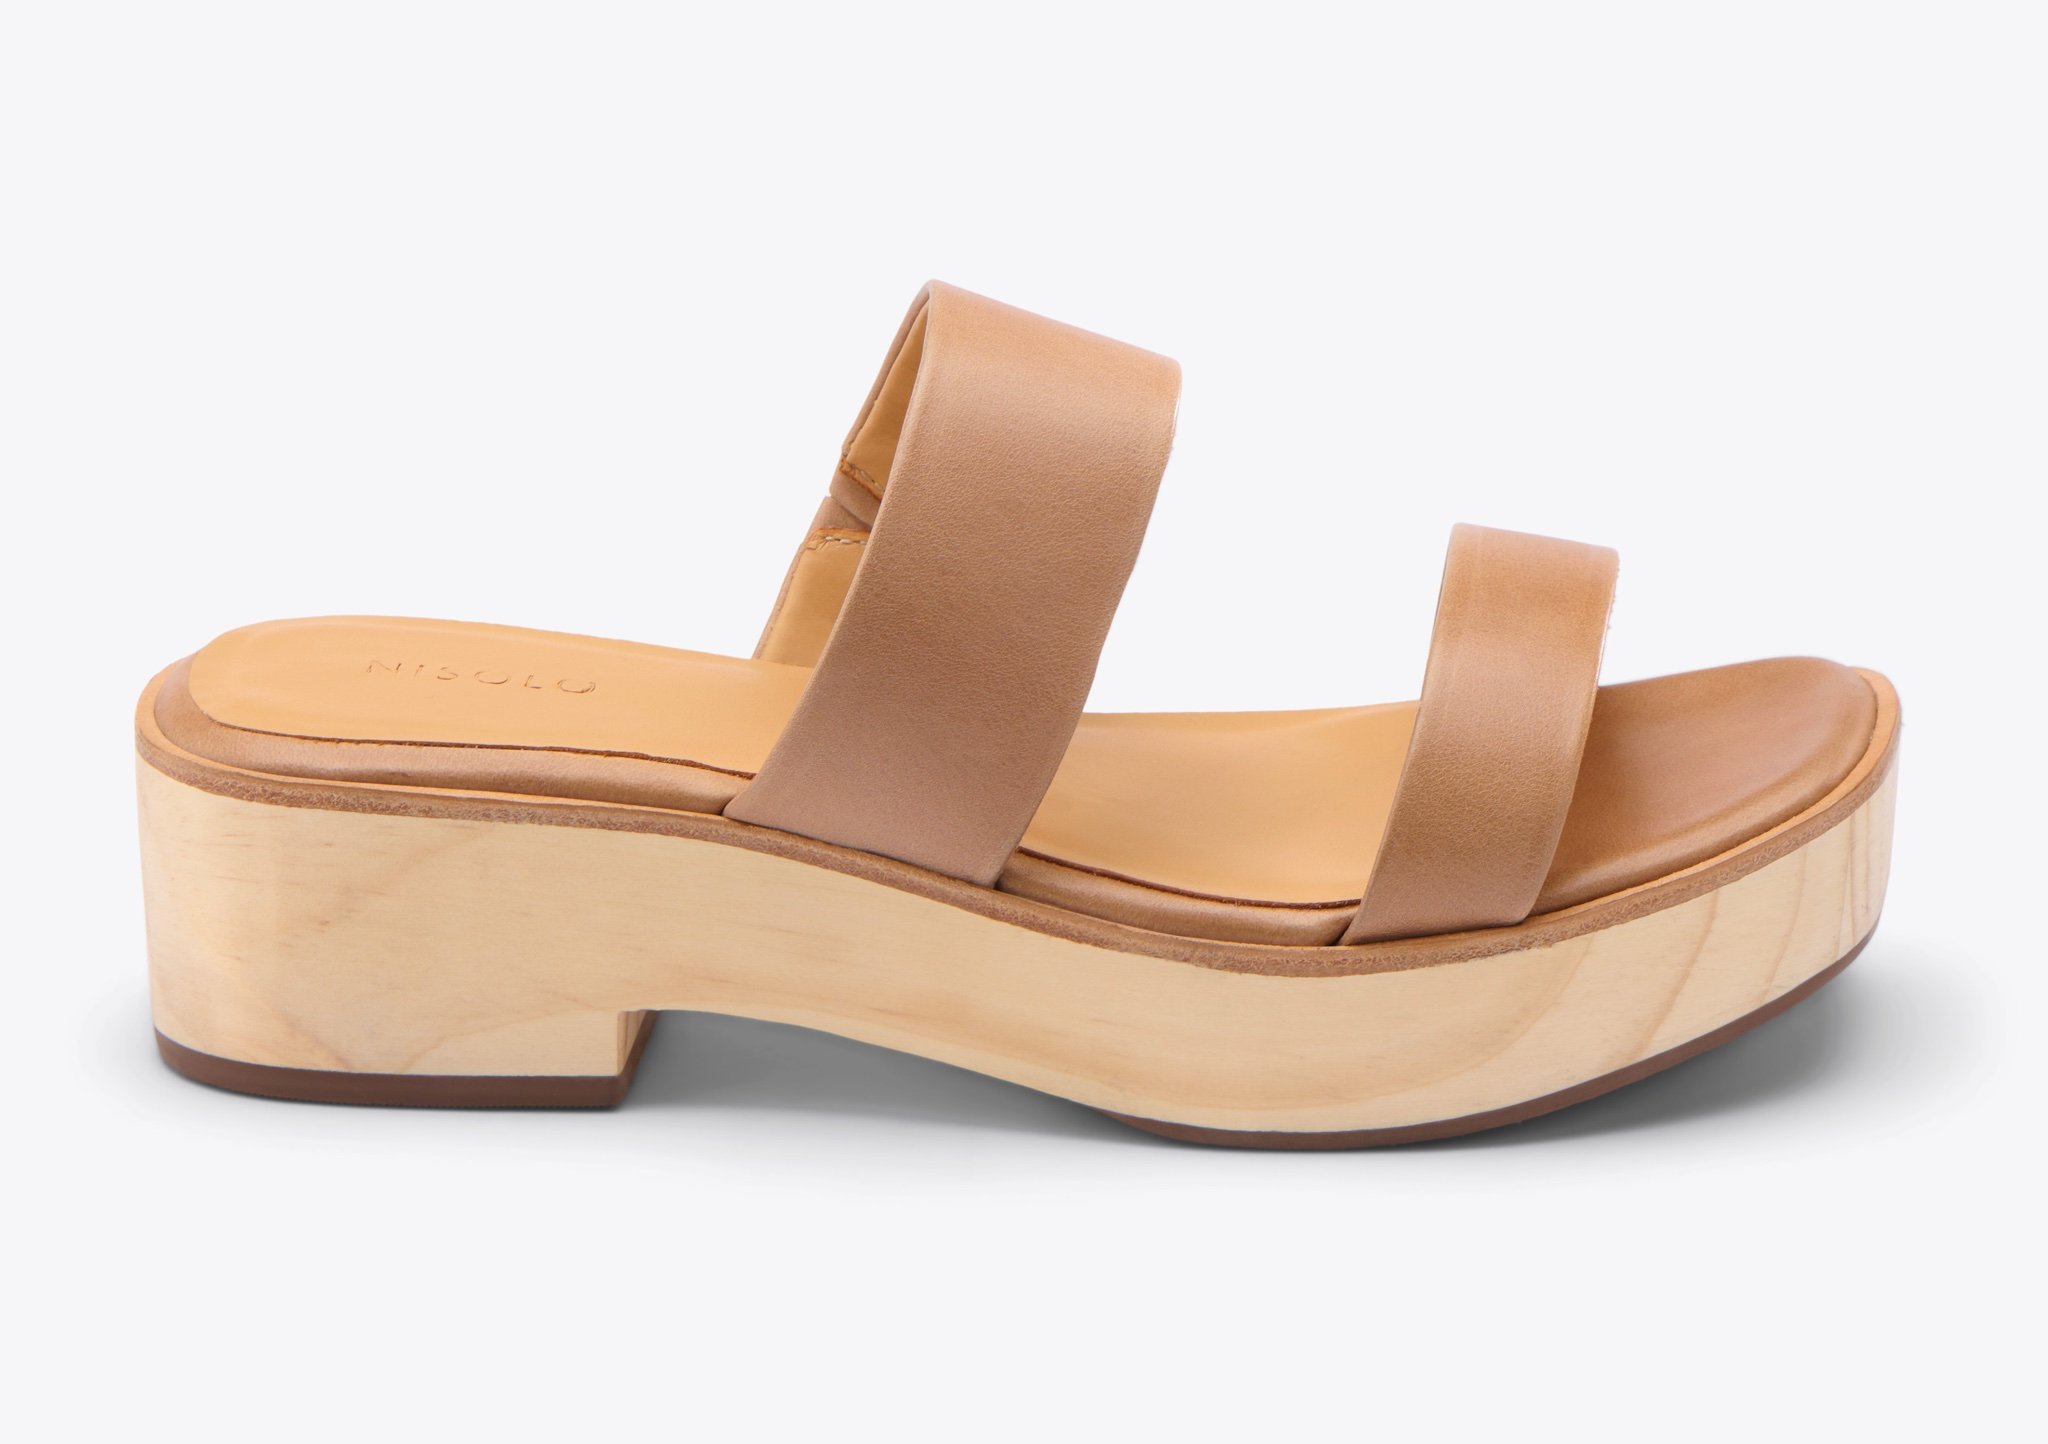 Nisolo Ellie All-Day Clog Almond - Every Nisolo product is built on the foundation of comfort, function, and design. 